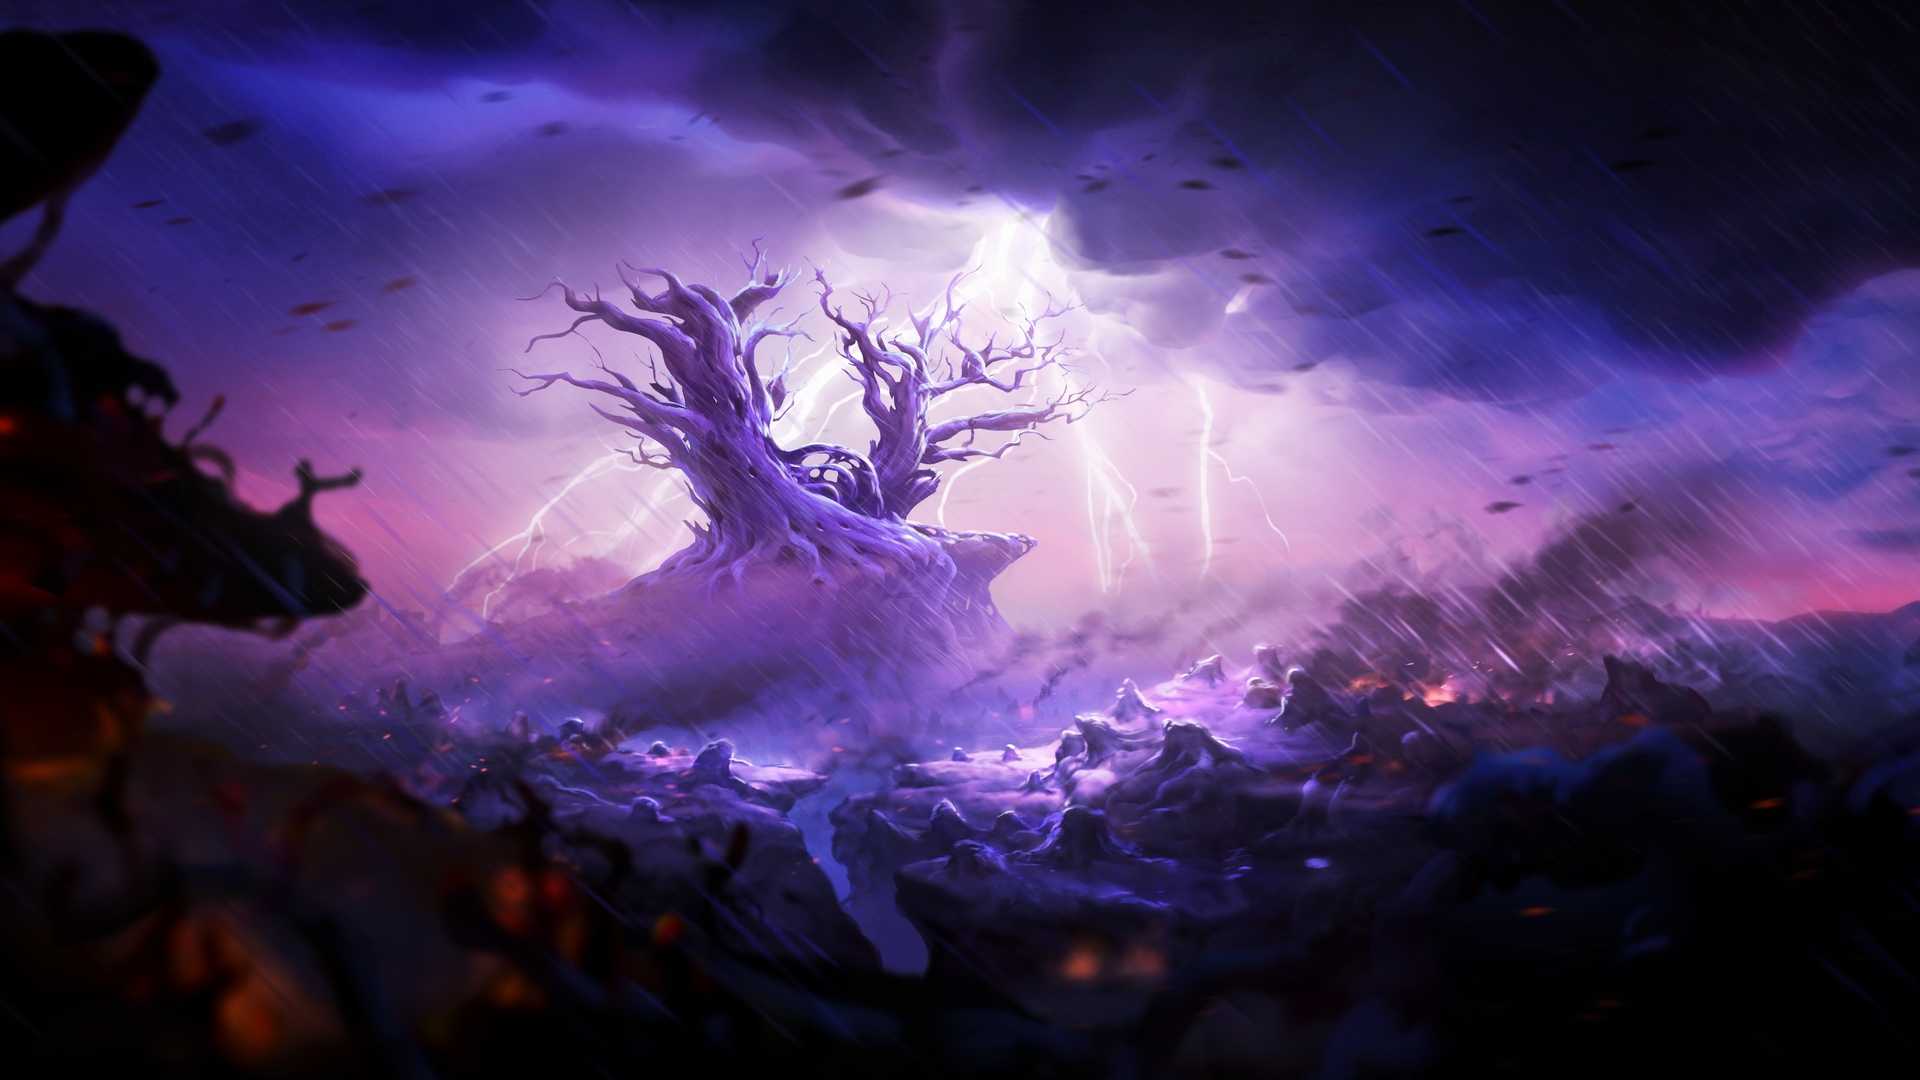 Ori and the Will of the Wisps Game 5 Wallpapers